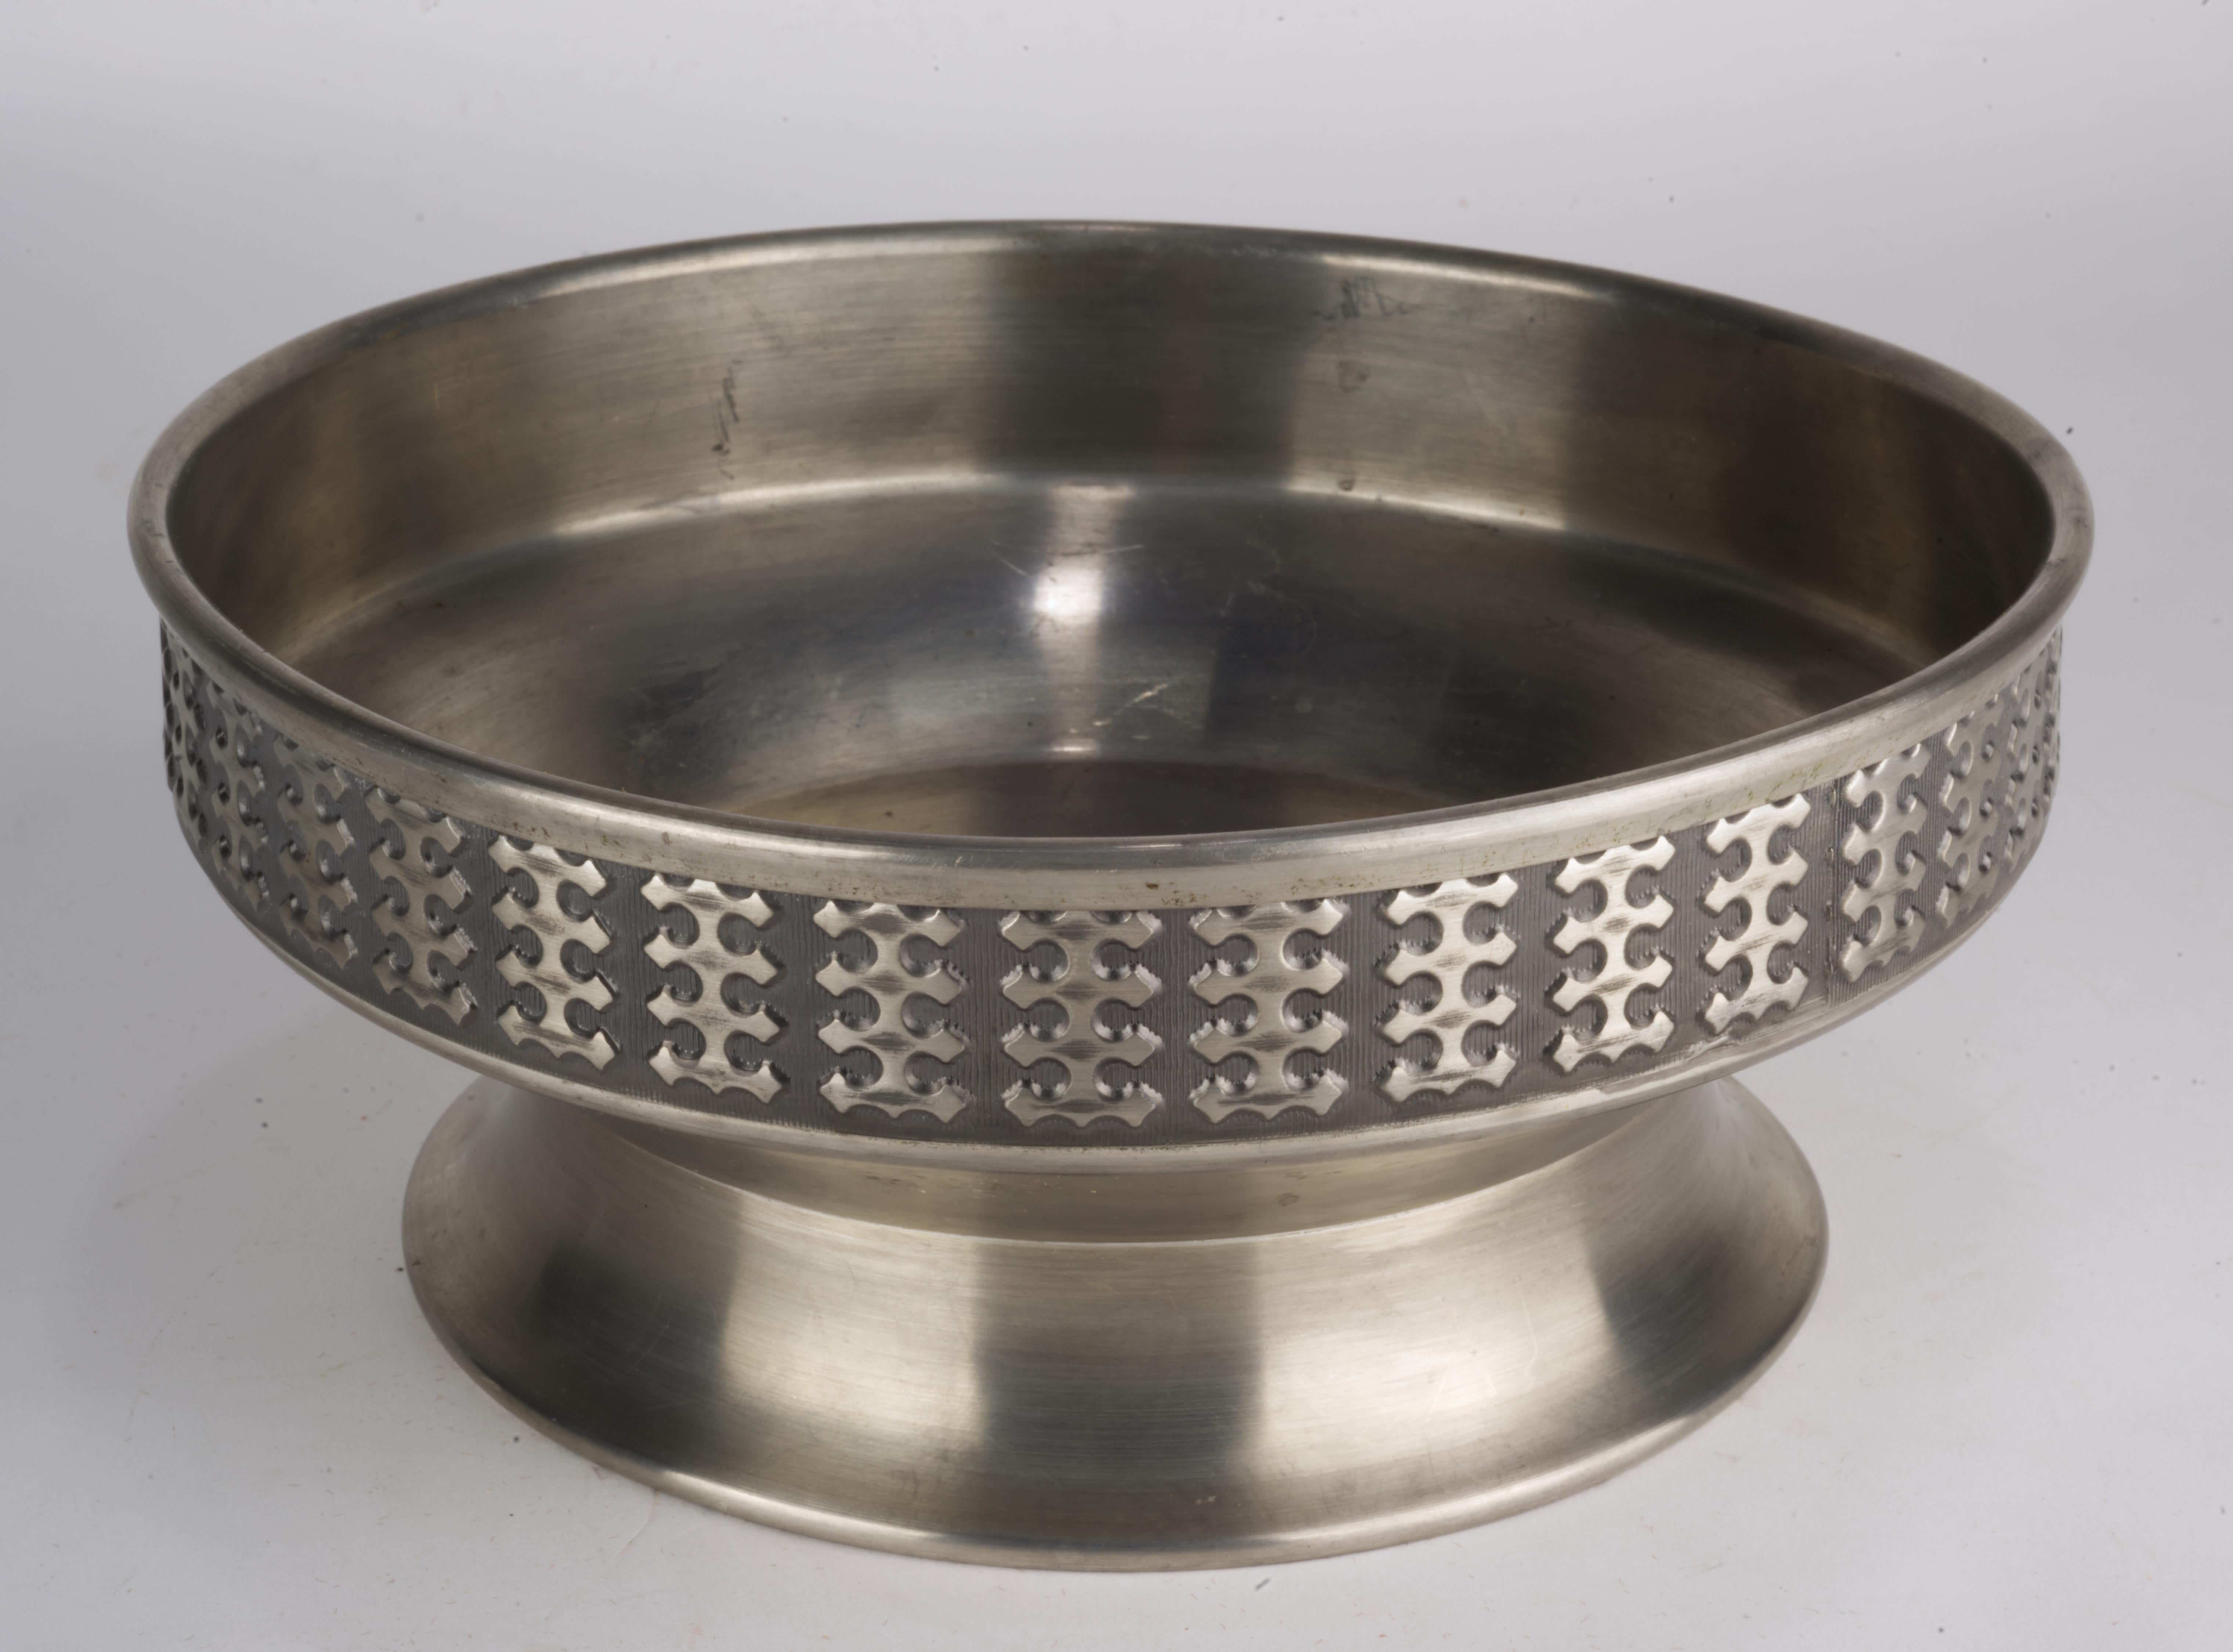  Rare Mastad Norway Footed Bowl in Scandinavian Midcentury Modern style was made by Mastad Norway in 1950s. It has wide, stable base, patterned sides, and is signed with manufacturer's logo on the bottom. It's in a good condition with light wear